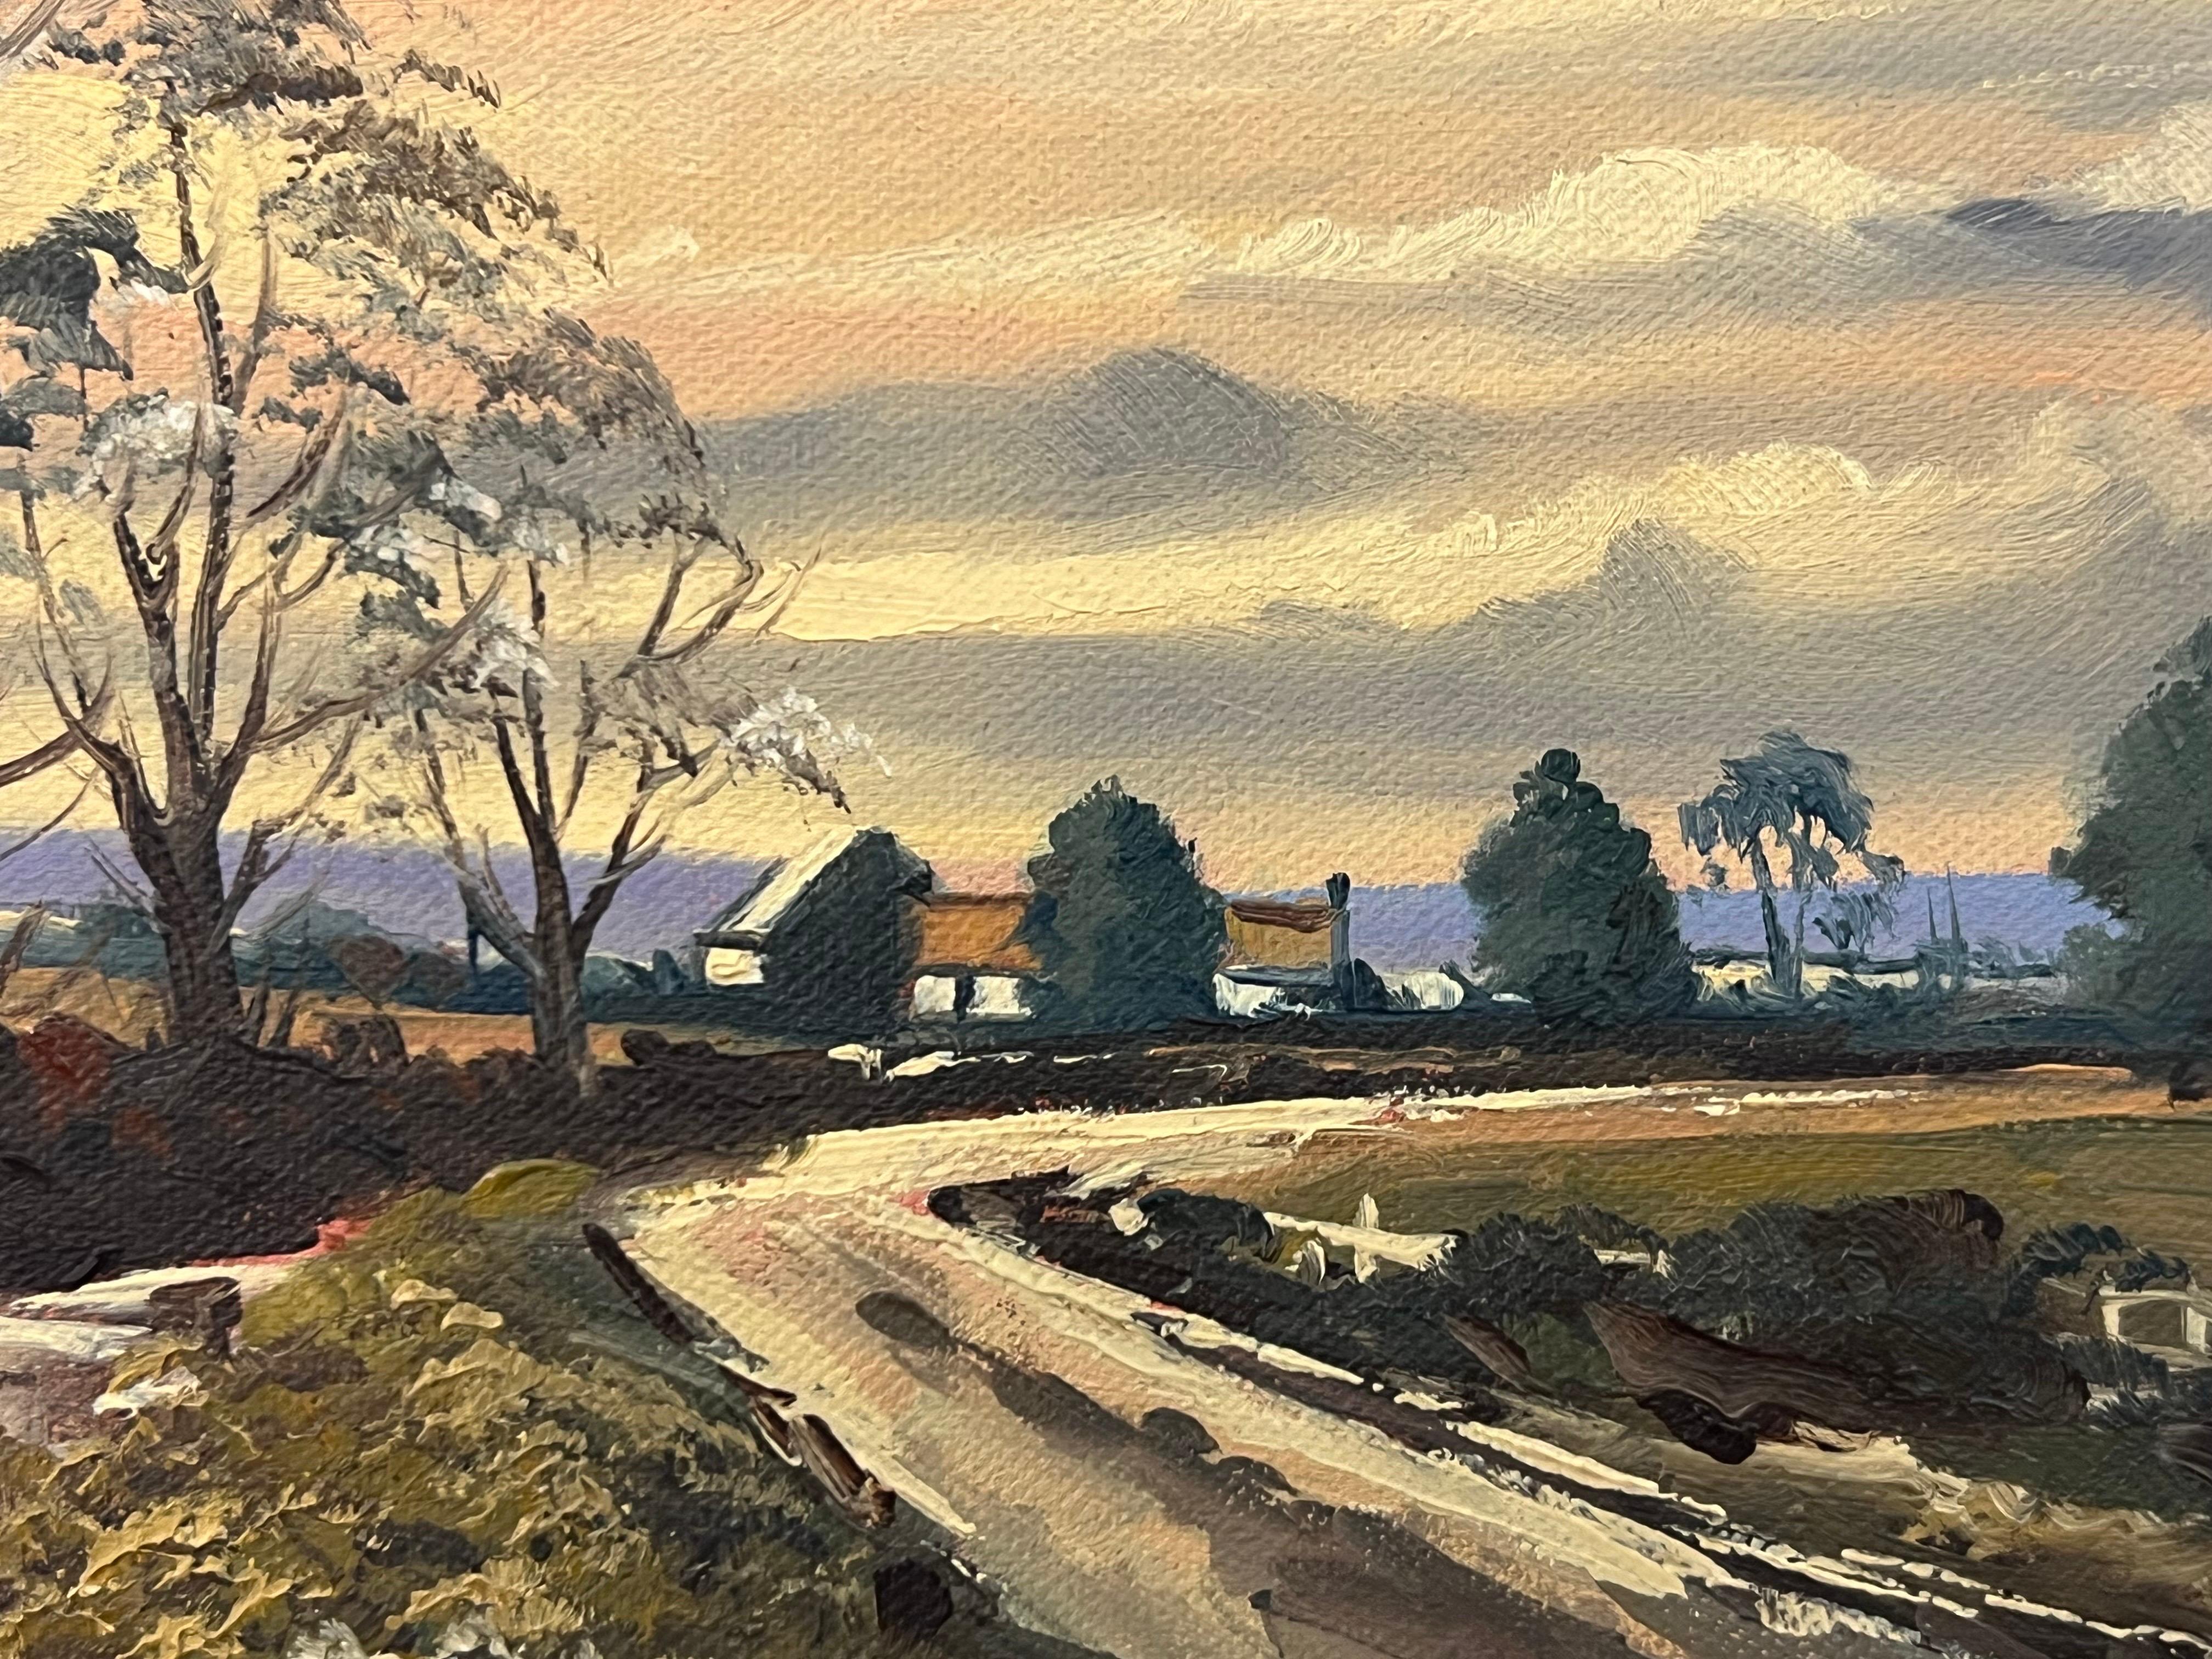 Sunset in Ireland Countryside - Original Oil Painting by Northern Irish Artist For Sale 4